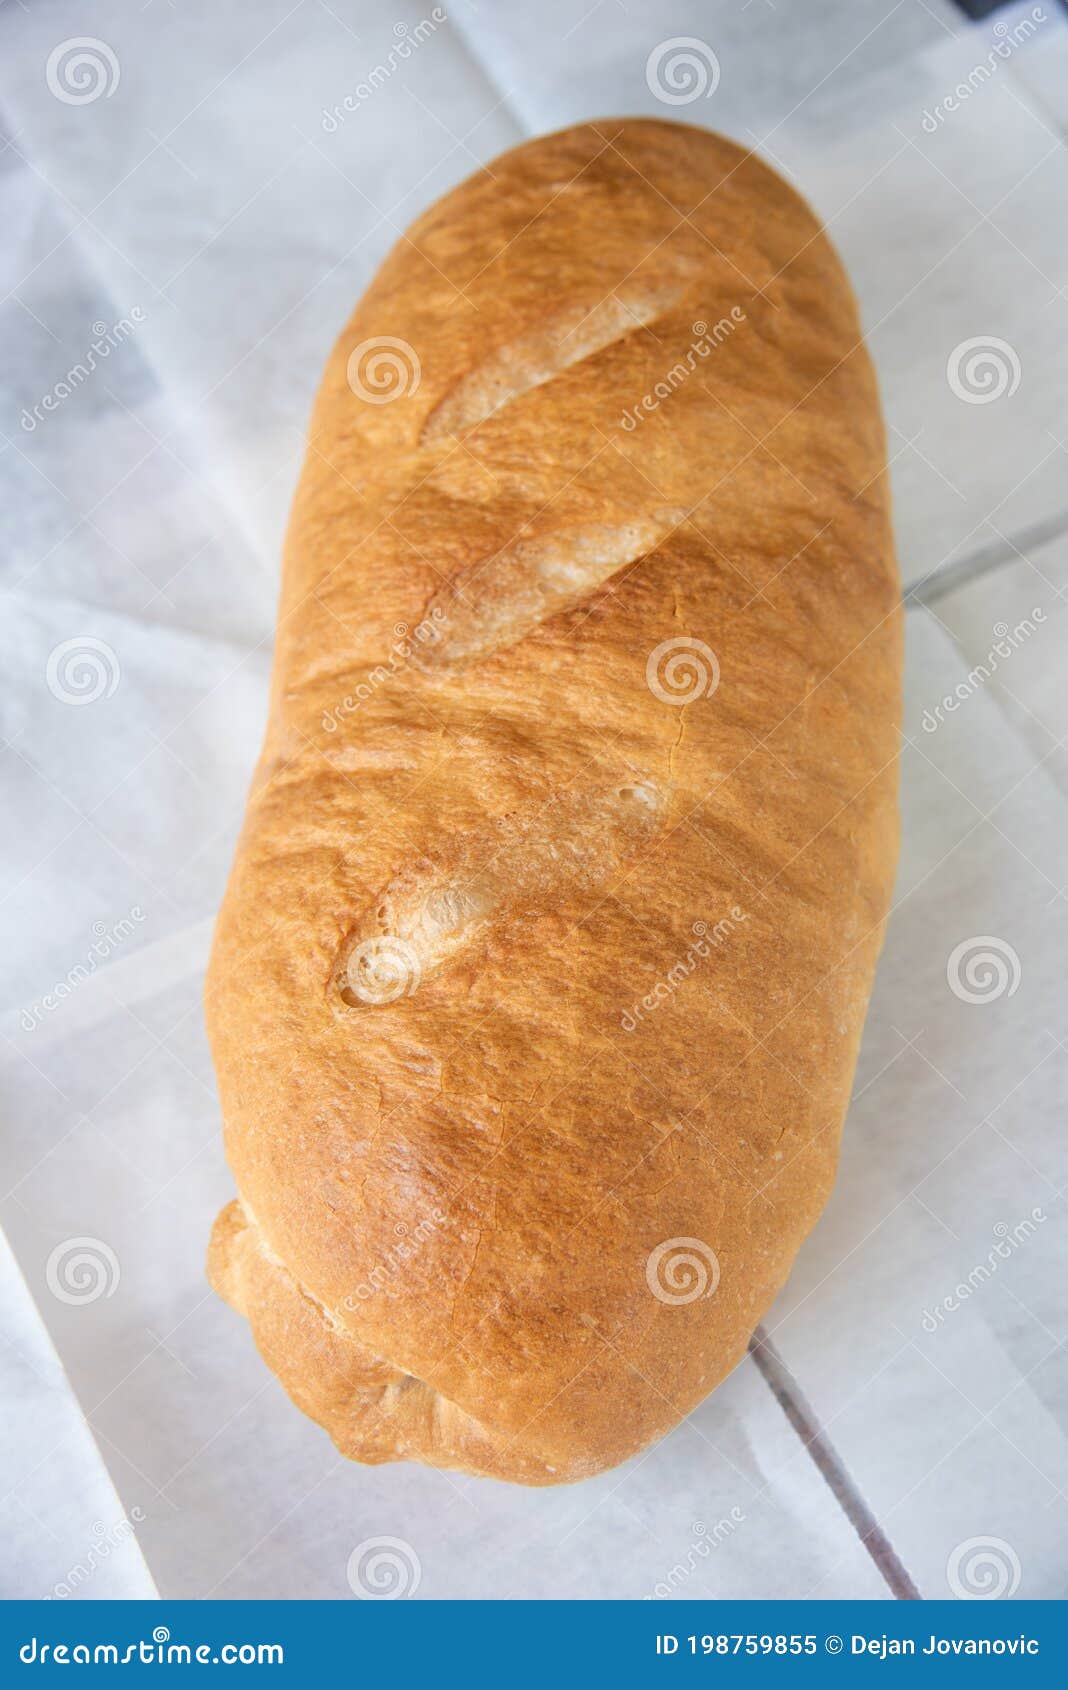 home made bread loaf